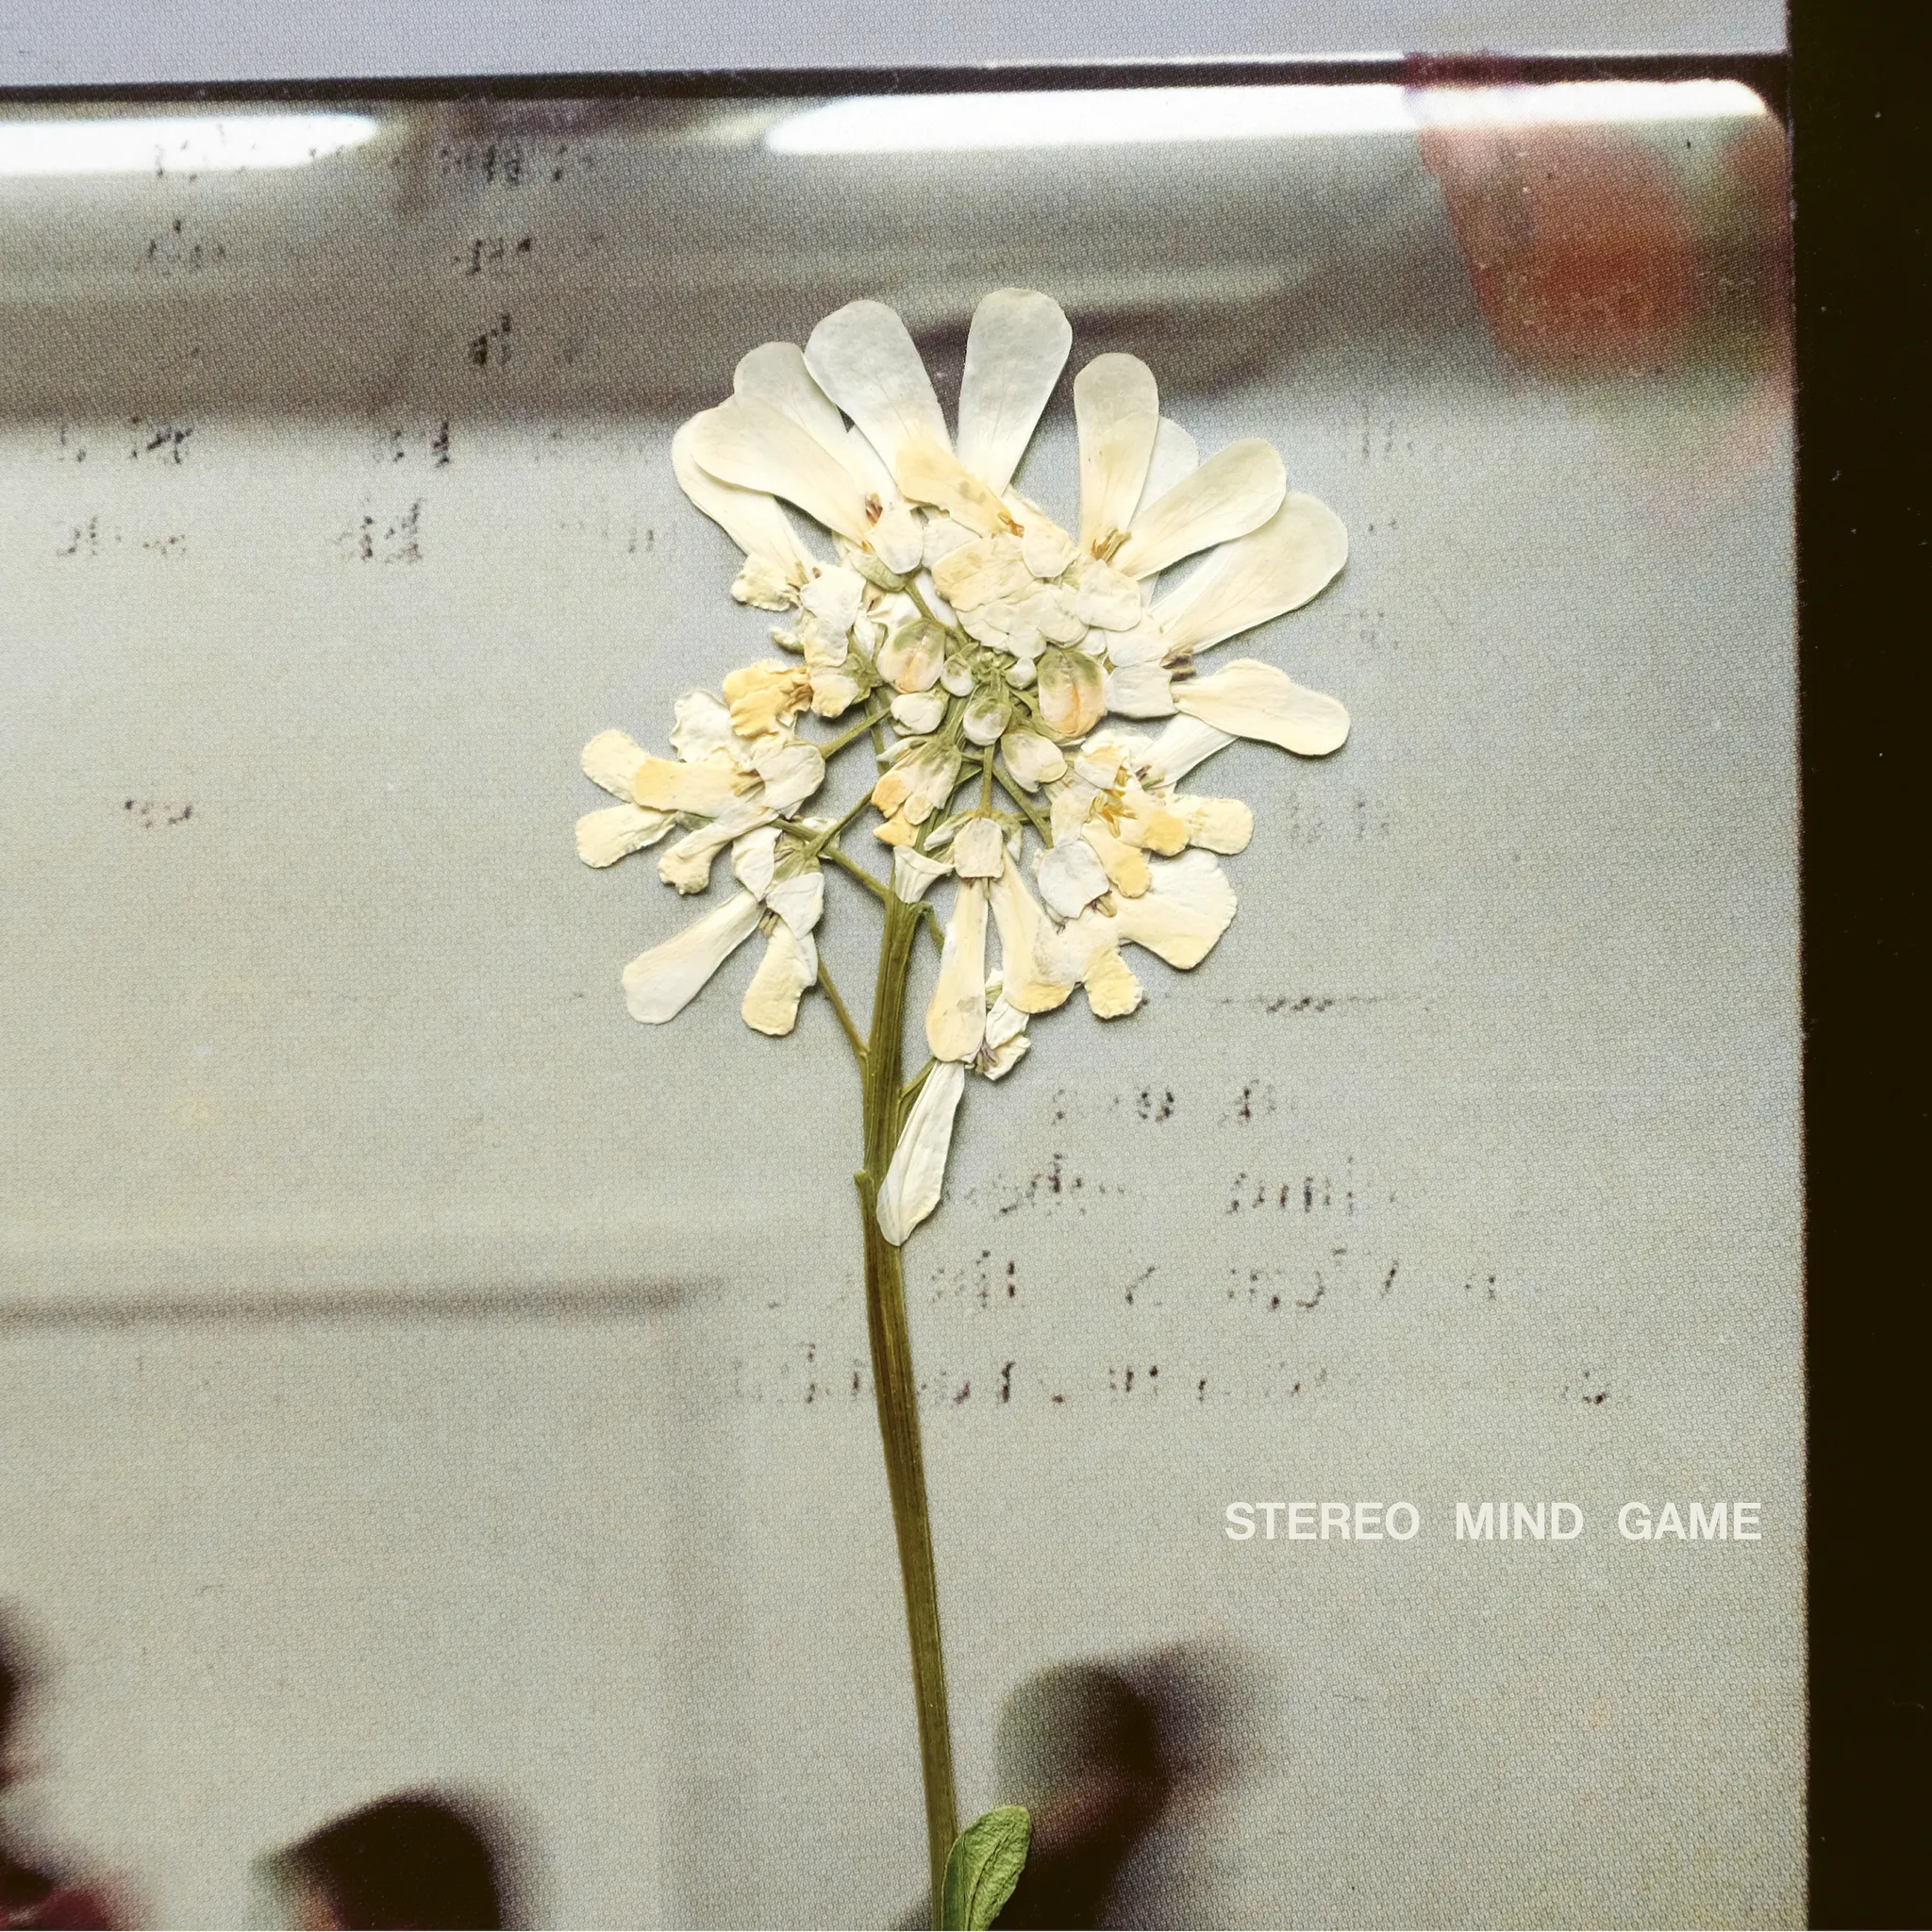 <strong>DAUGHTER - Stereo Mind Game</strong> (Vinyl LP - brown)